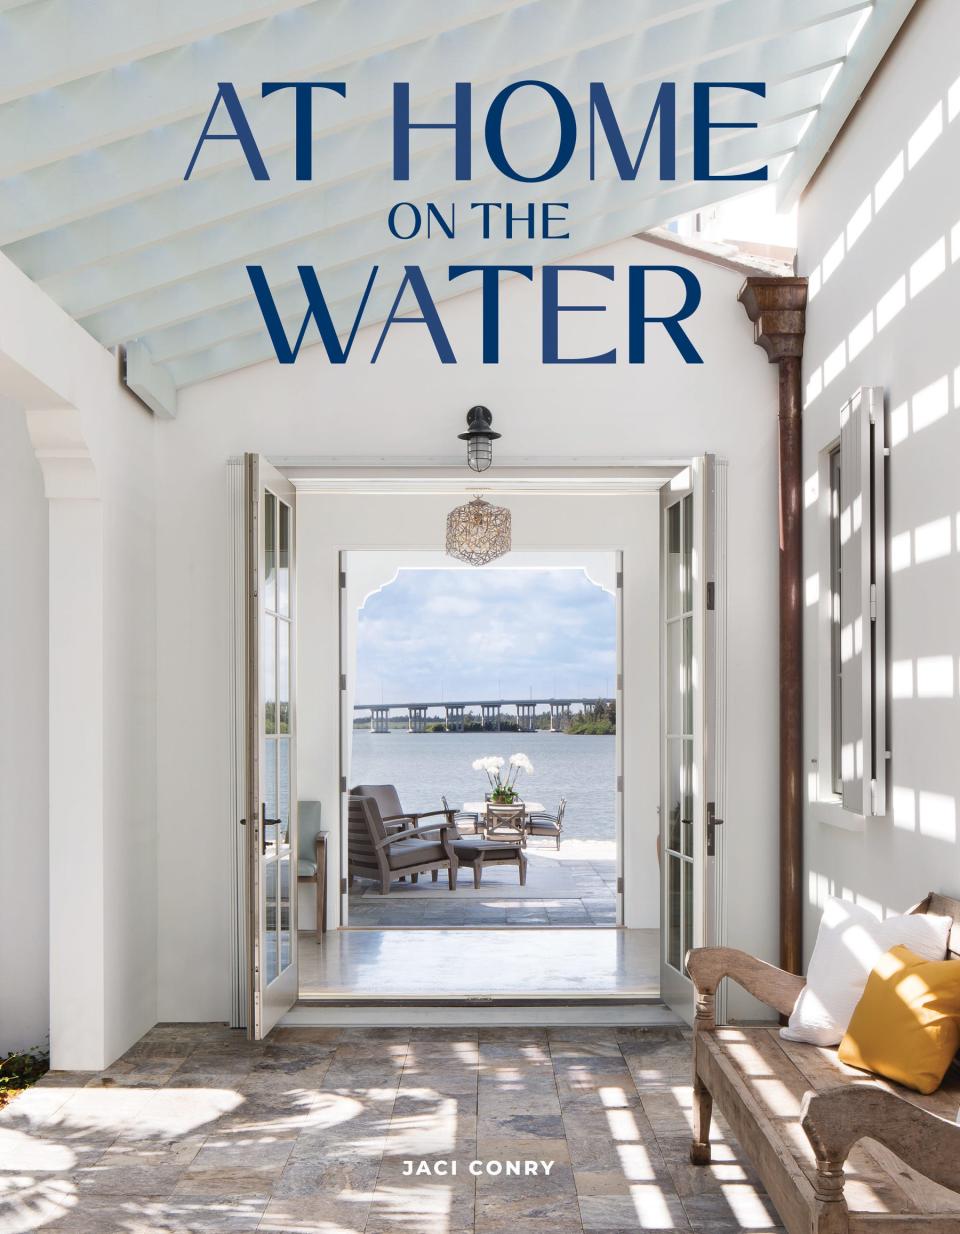 “I think everyone senses the restorative qualities of being by the sea,” said Jaci Conroy, author of “At Home on the Water.”